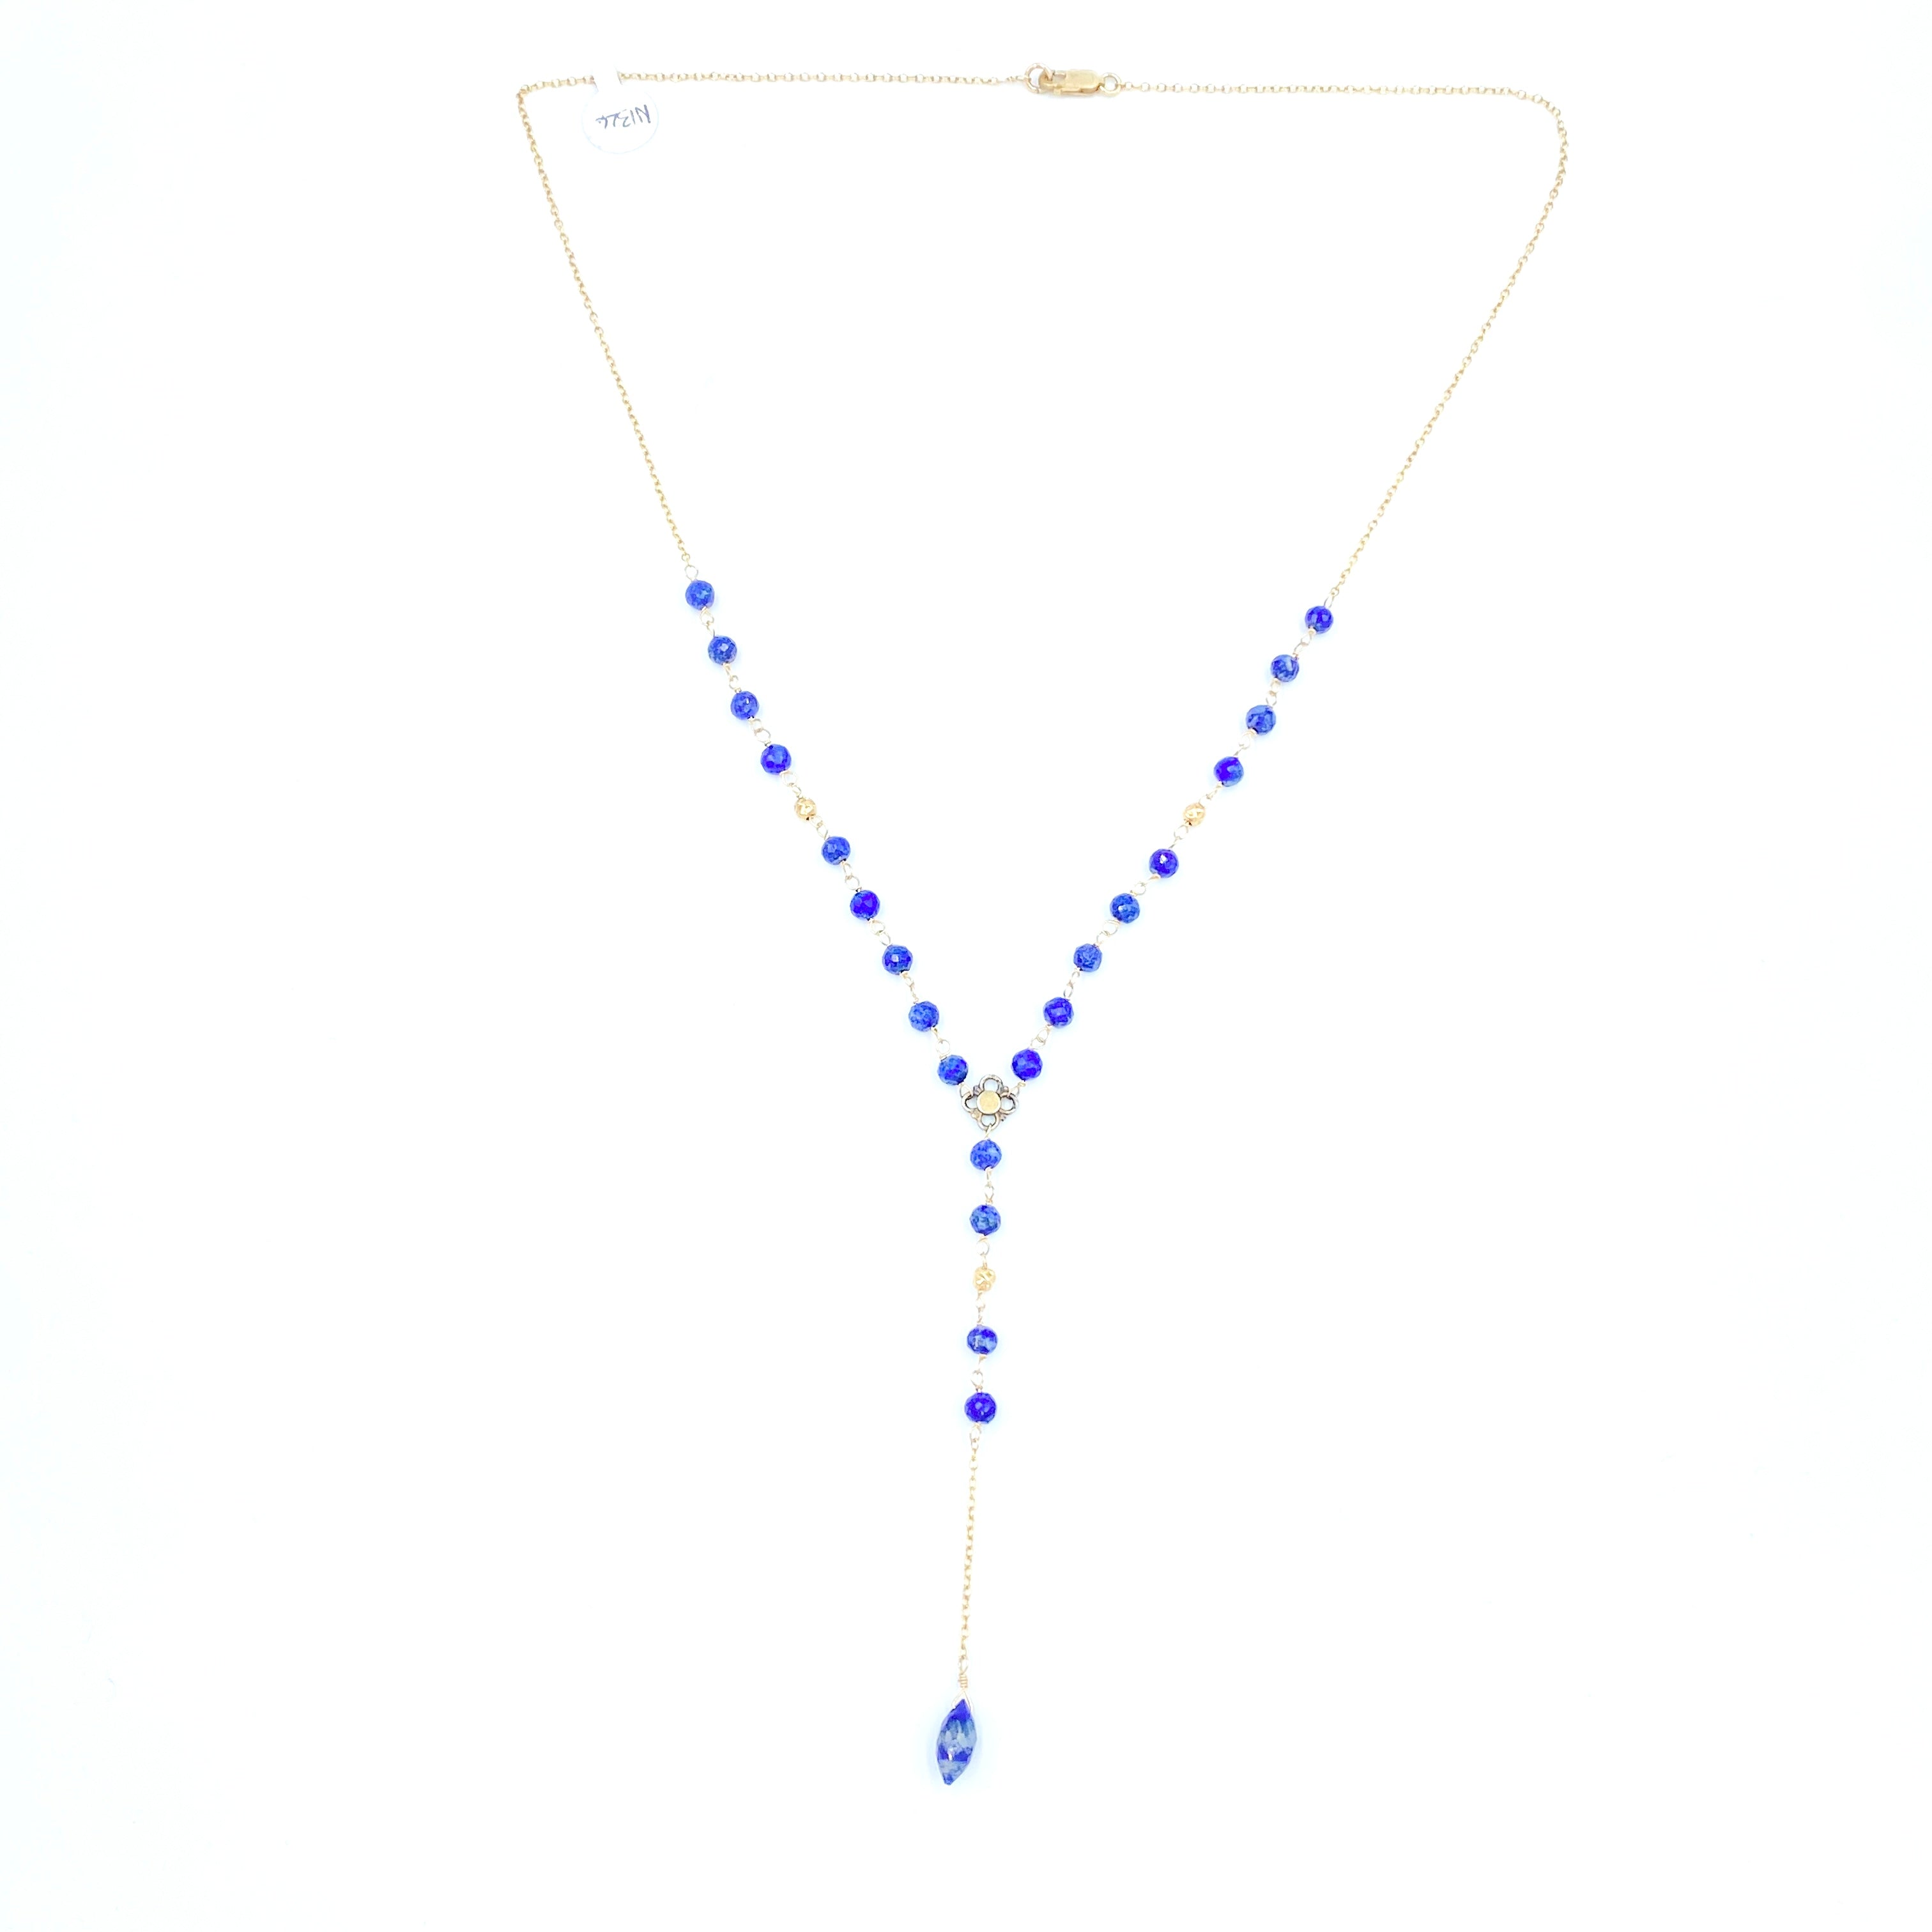 Joanna Bisley 14kt Goldfill and Lapis Necklace